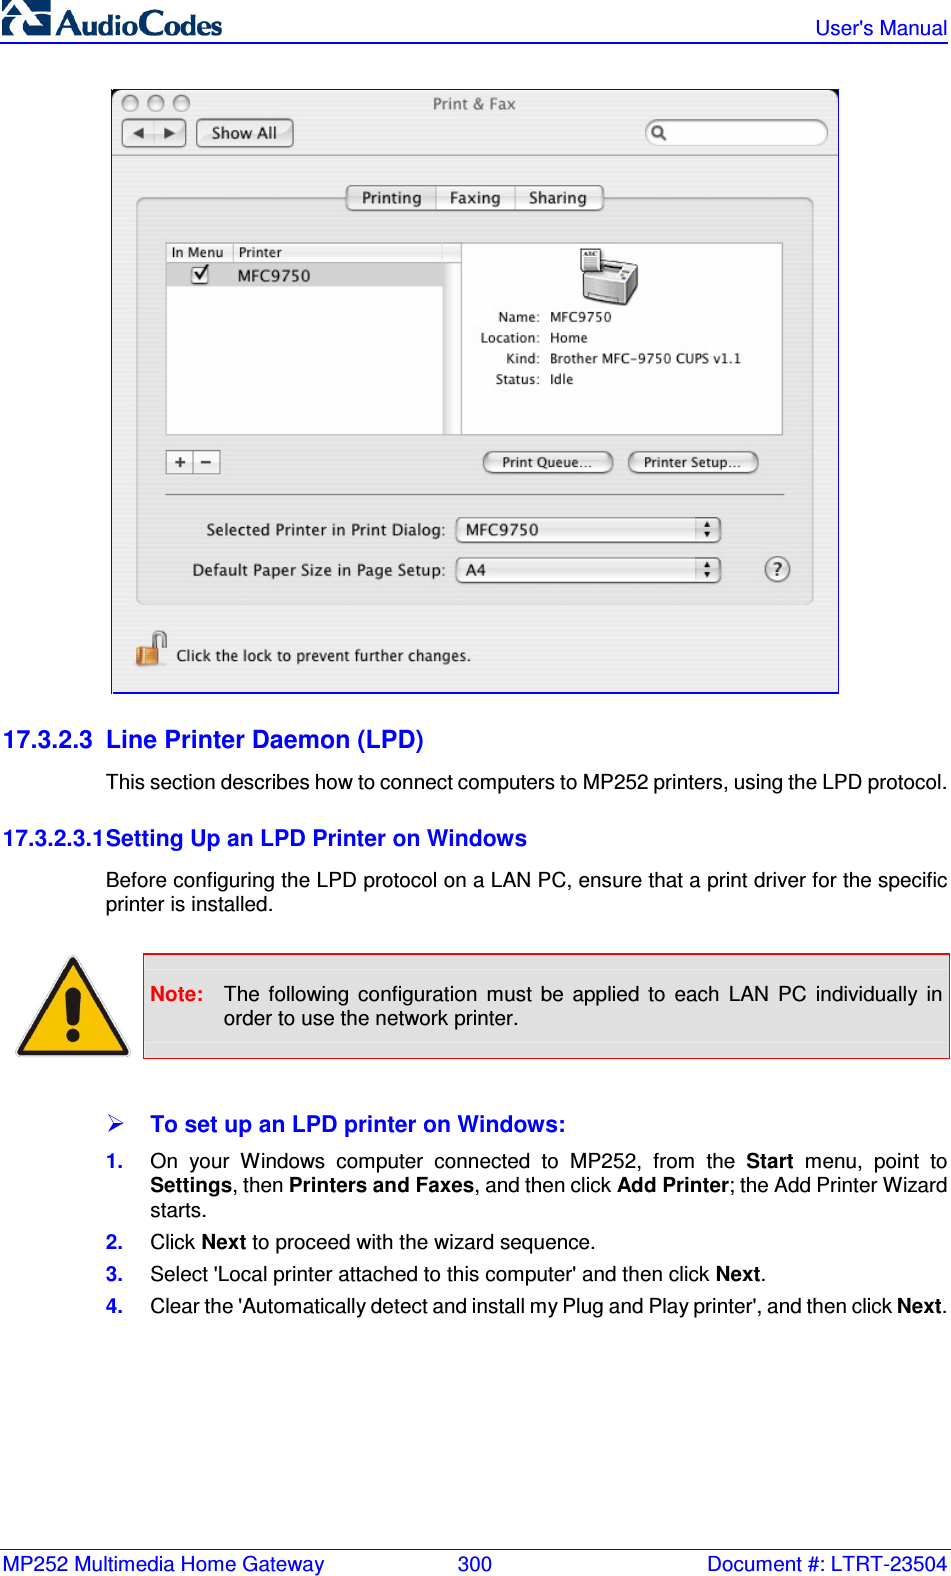 MP252 Multimedia Home Gateway  300  Document #: LTRT-23504   User&apos;s Manual   17.3.2.3  Line Printer Daemon (LPD) This section describes how to connect computers to MP252 printers, using the LPD protocol.  17.3.2.3.1 Setting Up an LPD Printer on Windows Before configuring the LPD protocol on a LAN PC, ensure that a print driver for the specific printer is installed.   Note:  The  following  configuration  must  be  applied  to  each  LAN  PC  individually  in order to use the network printer.   To set up an LPD printer on Windows: 1.  On  your  Windows  computer  connected  to  MP252,  from  the  Start  menu,  point  to Settings, then Printers and Faxes, and then click Add Printer; the Add Printer Wizard starts. 2.  Click Next to proceed with the wizard sequence. 3.  Select &apos;Local printer attached to this computer&apos; and then click Next. 4.  Clear the &apos;Automatically detect and install my Plug and Play printer&apos;, and then click Next. 